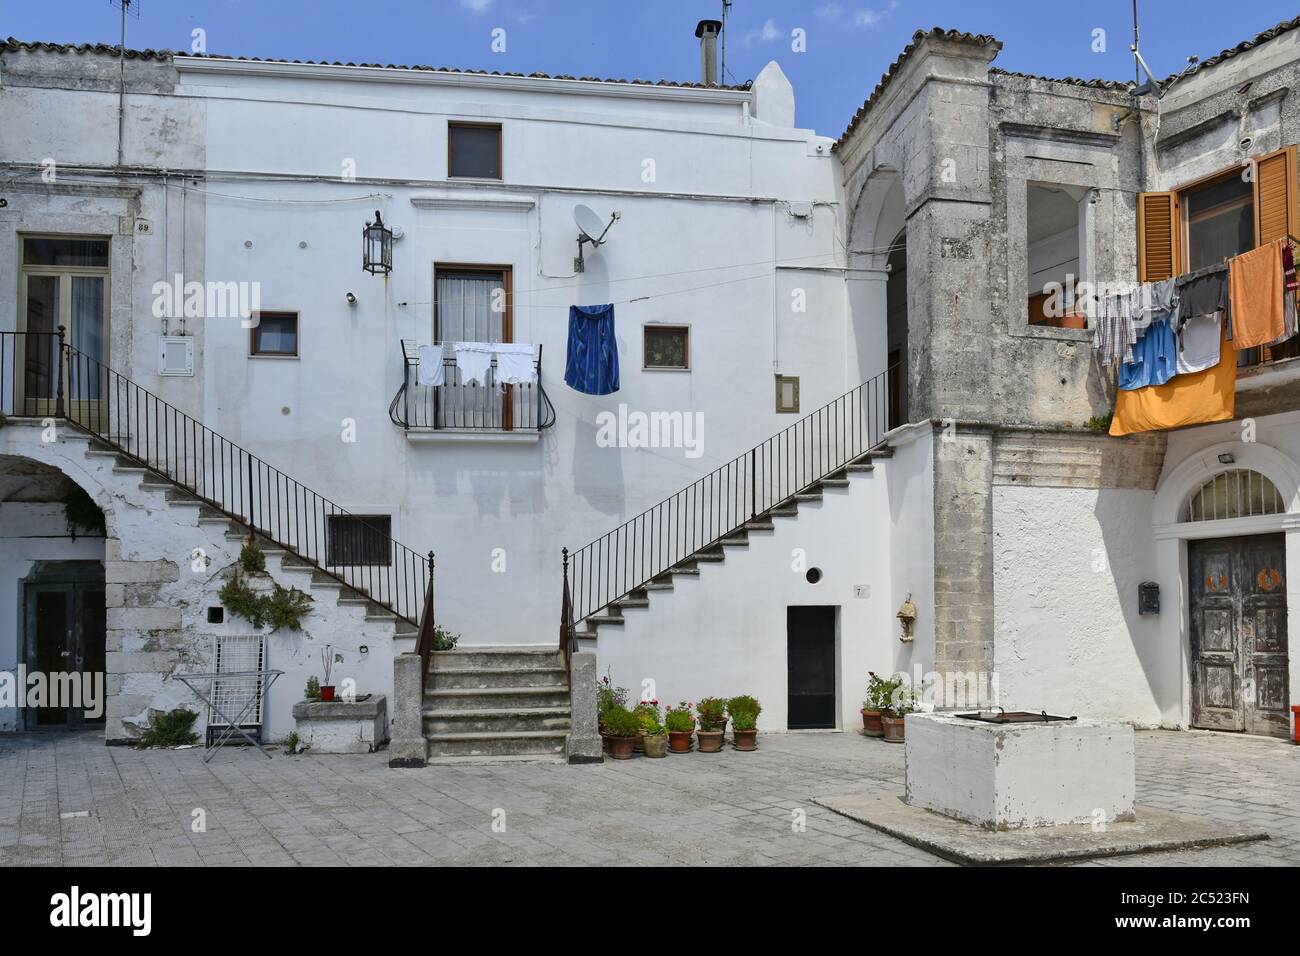 A narrow street in the old town of Monte Sant'Angelo, Italy. Stock Photo